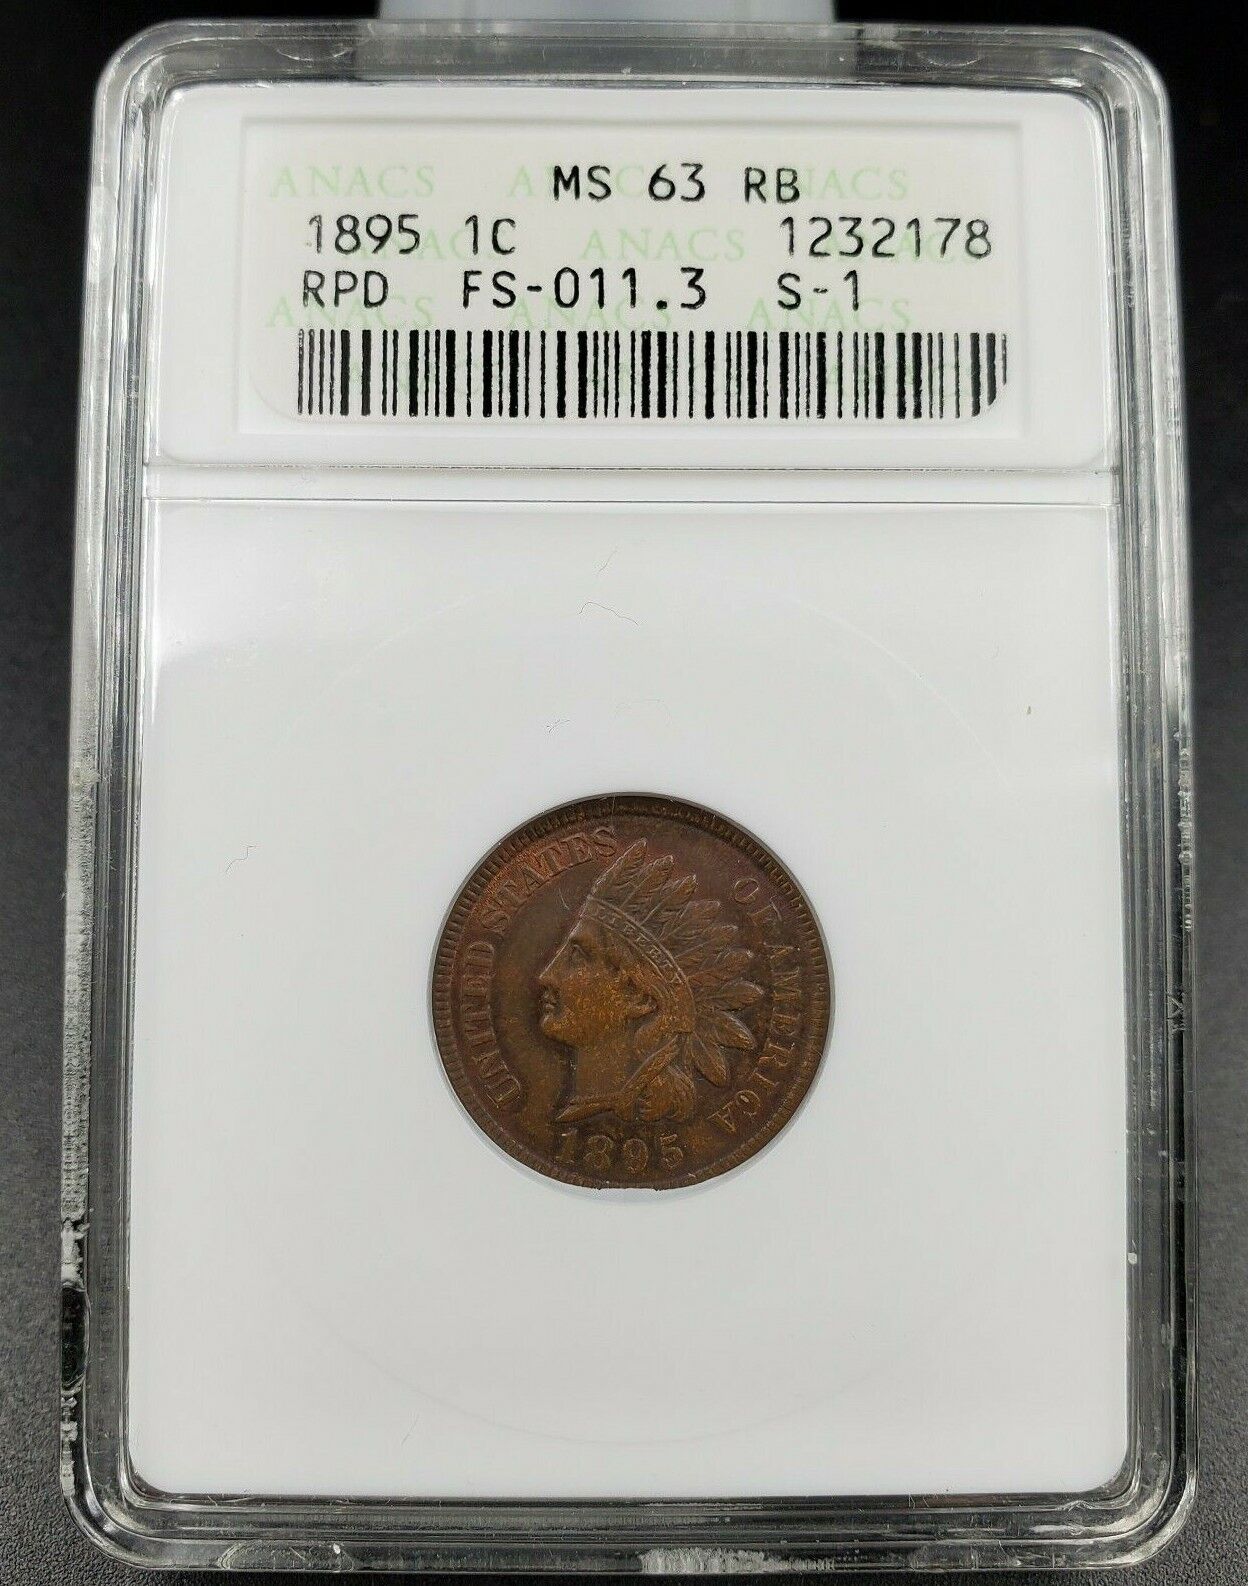 1895 Indian Cent Penny Error ANACS MS63 RB FS-011.3 FS-301 RPD BUSINESS STRIKE